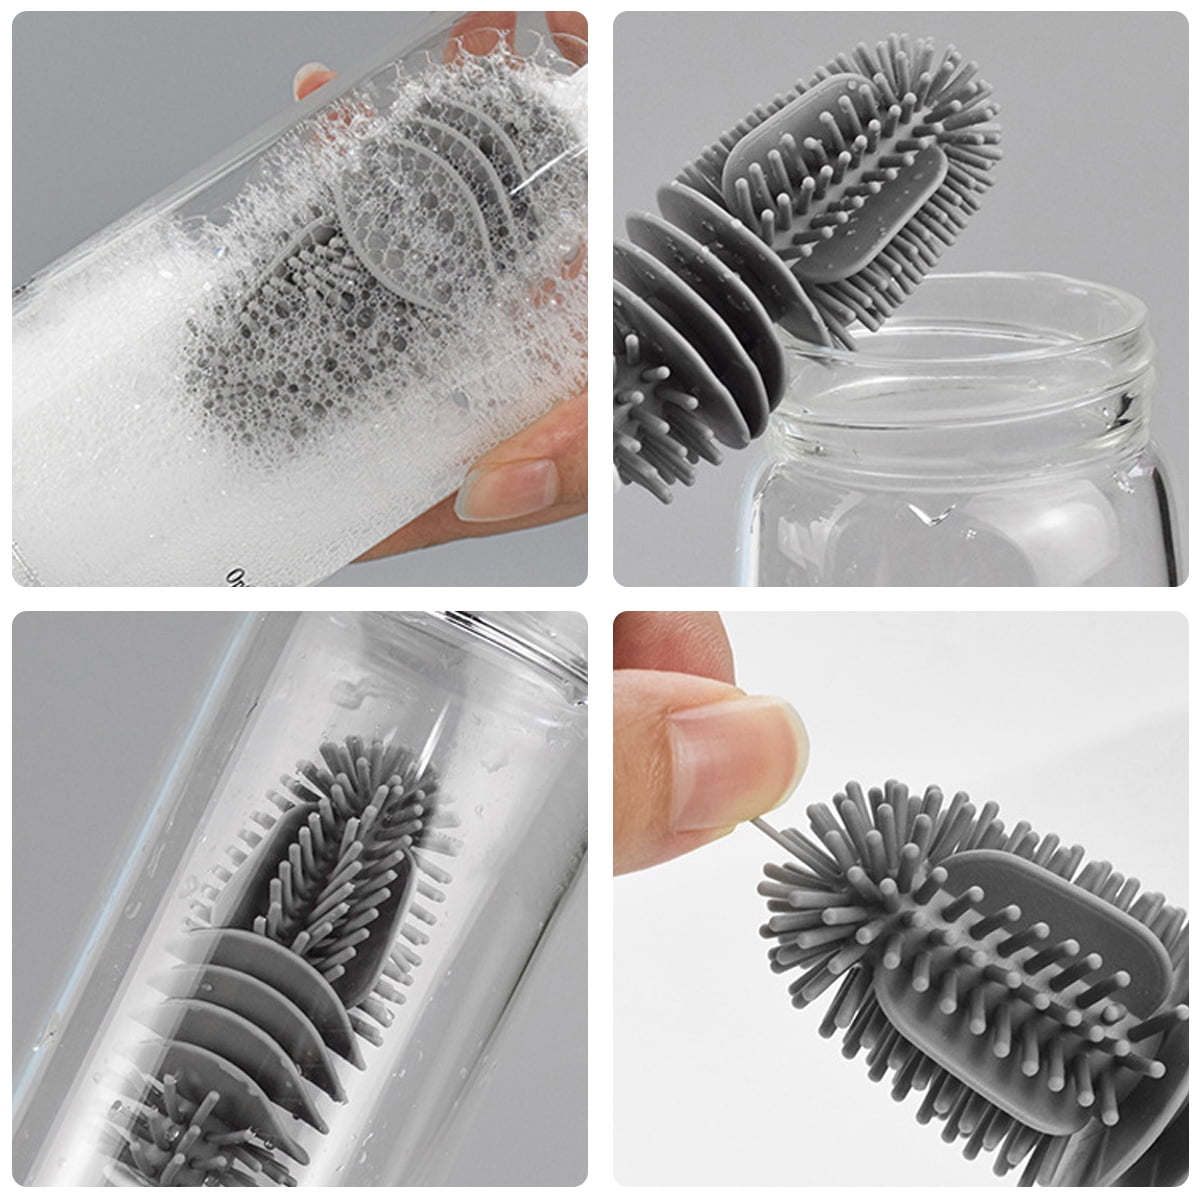 Nyidpsz 6pcs 3 in-1 Multi-Use U-Shaped Silicone Multifunctional Cleaning Brush Bottle Detail Brush Straw Cleaner Tools Bottle Lid Groove Cleaning